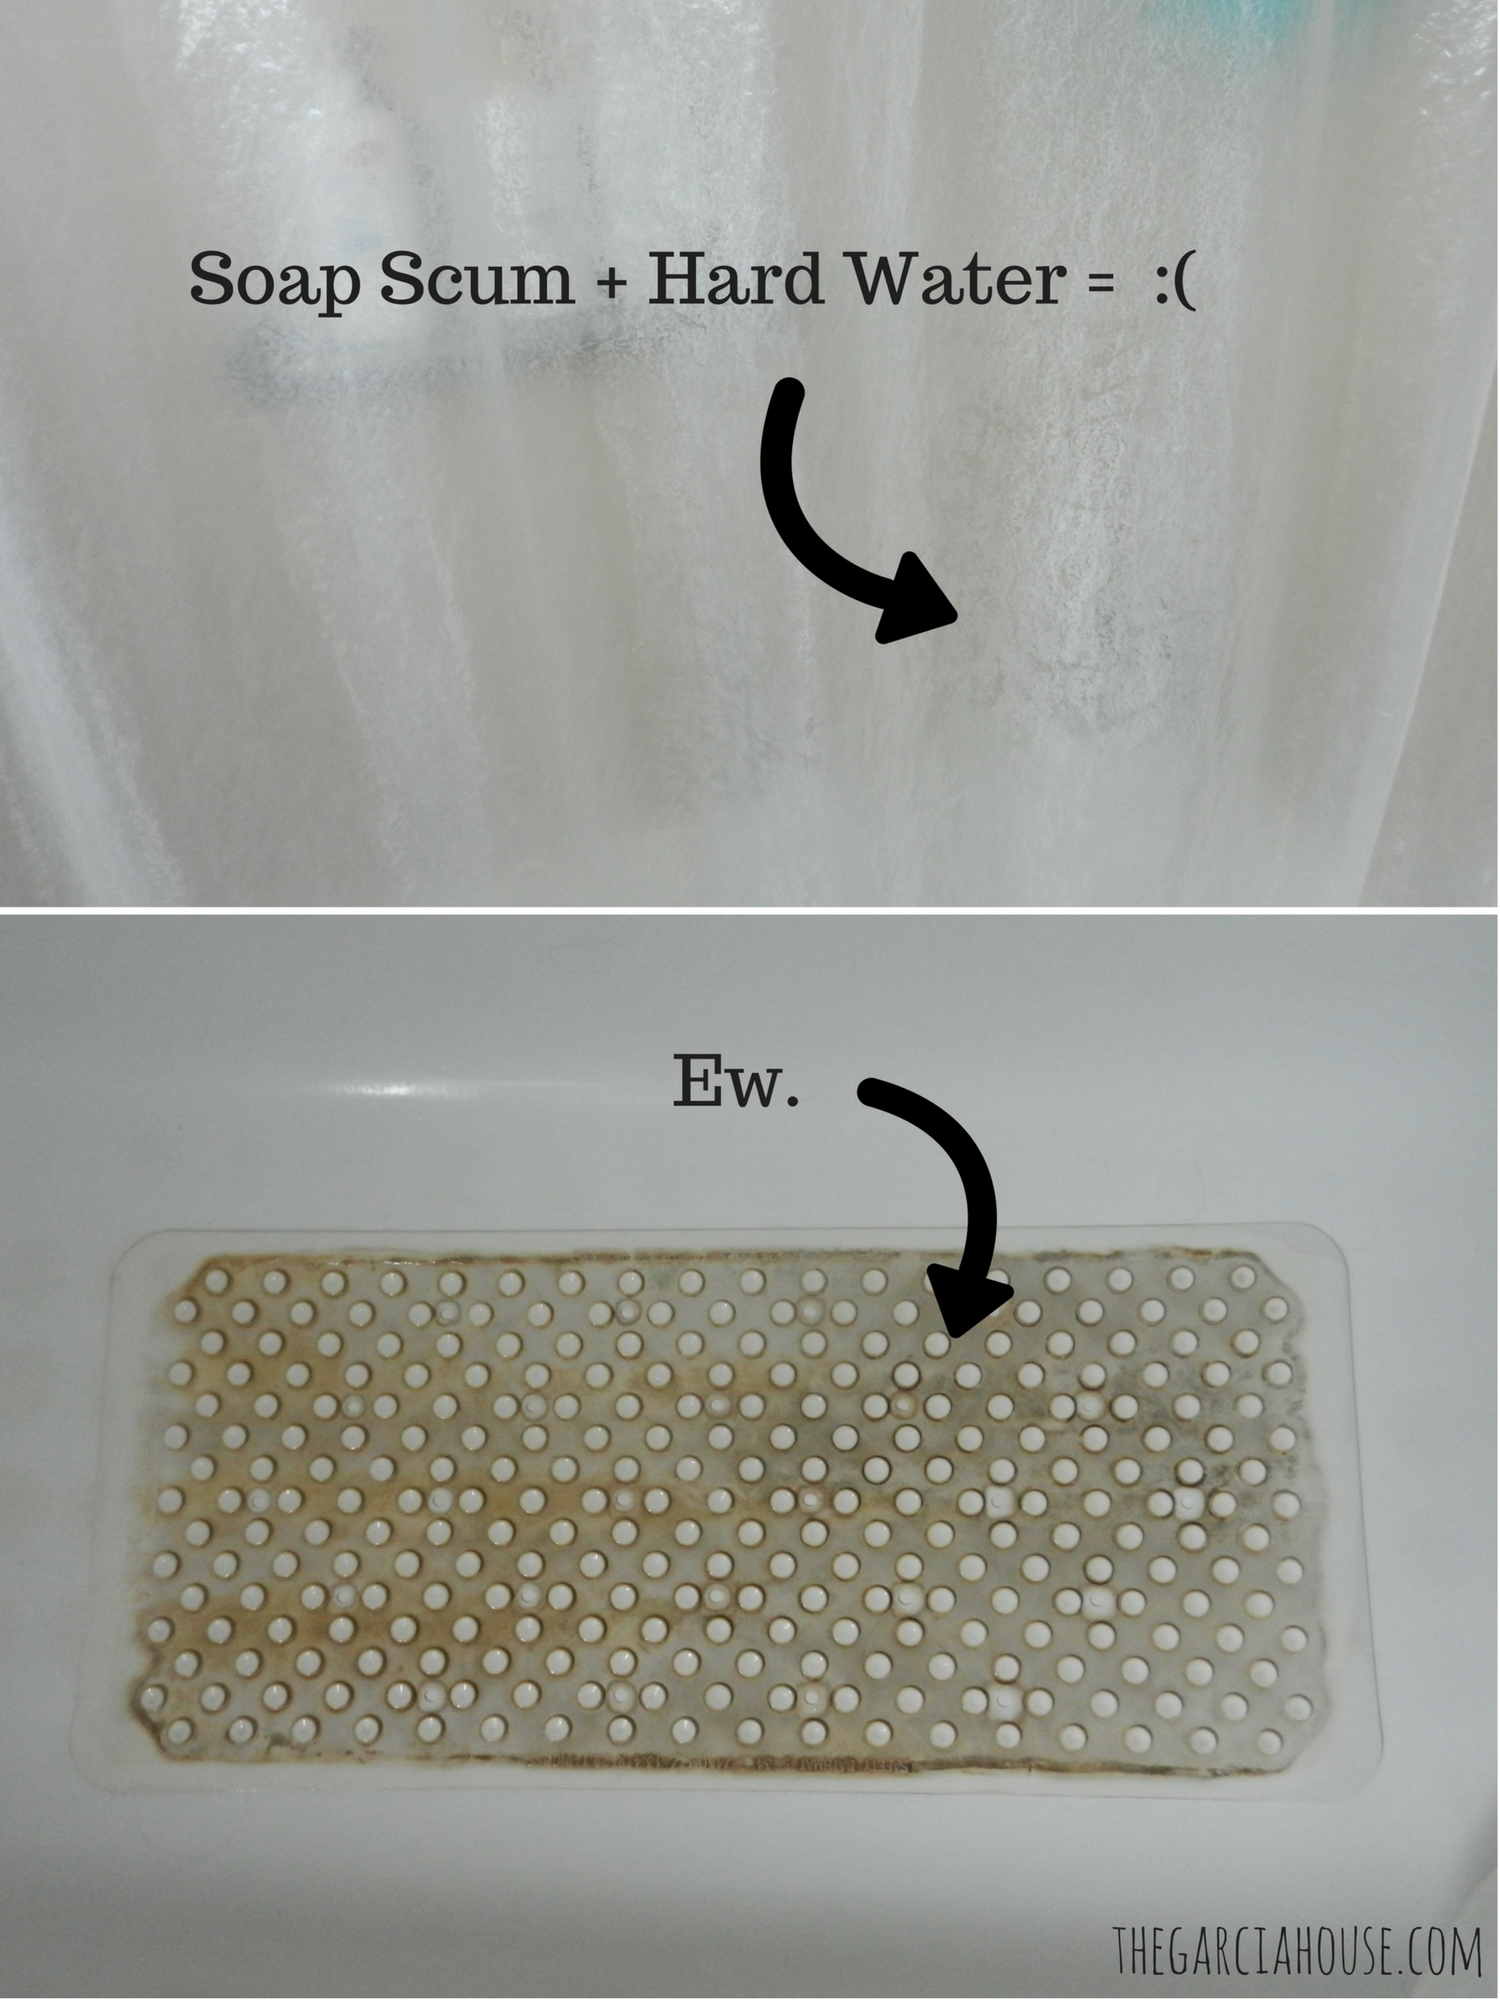 How to Wash your Shower Liner & Bathtub Mat